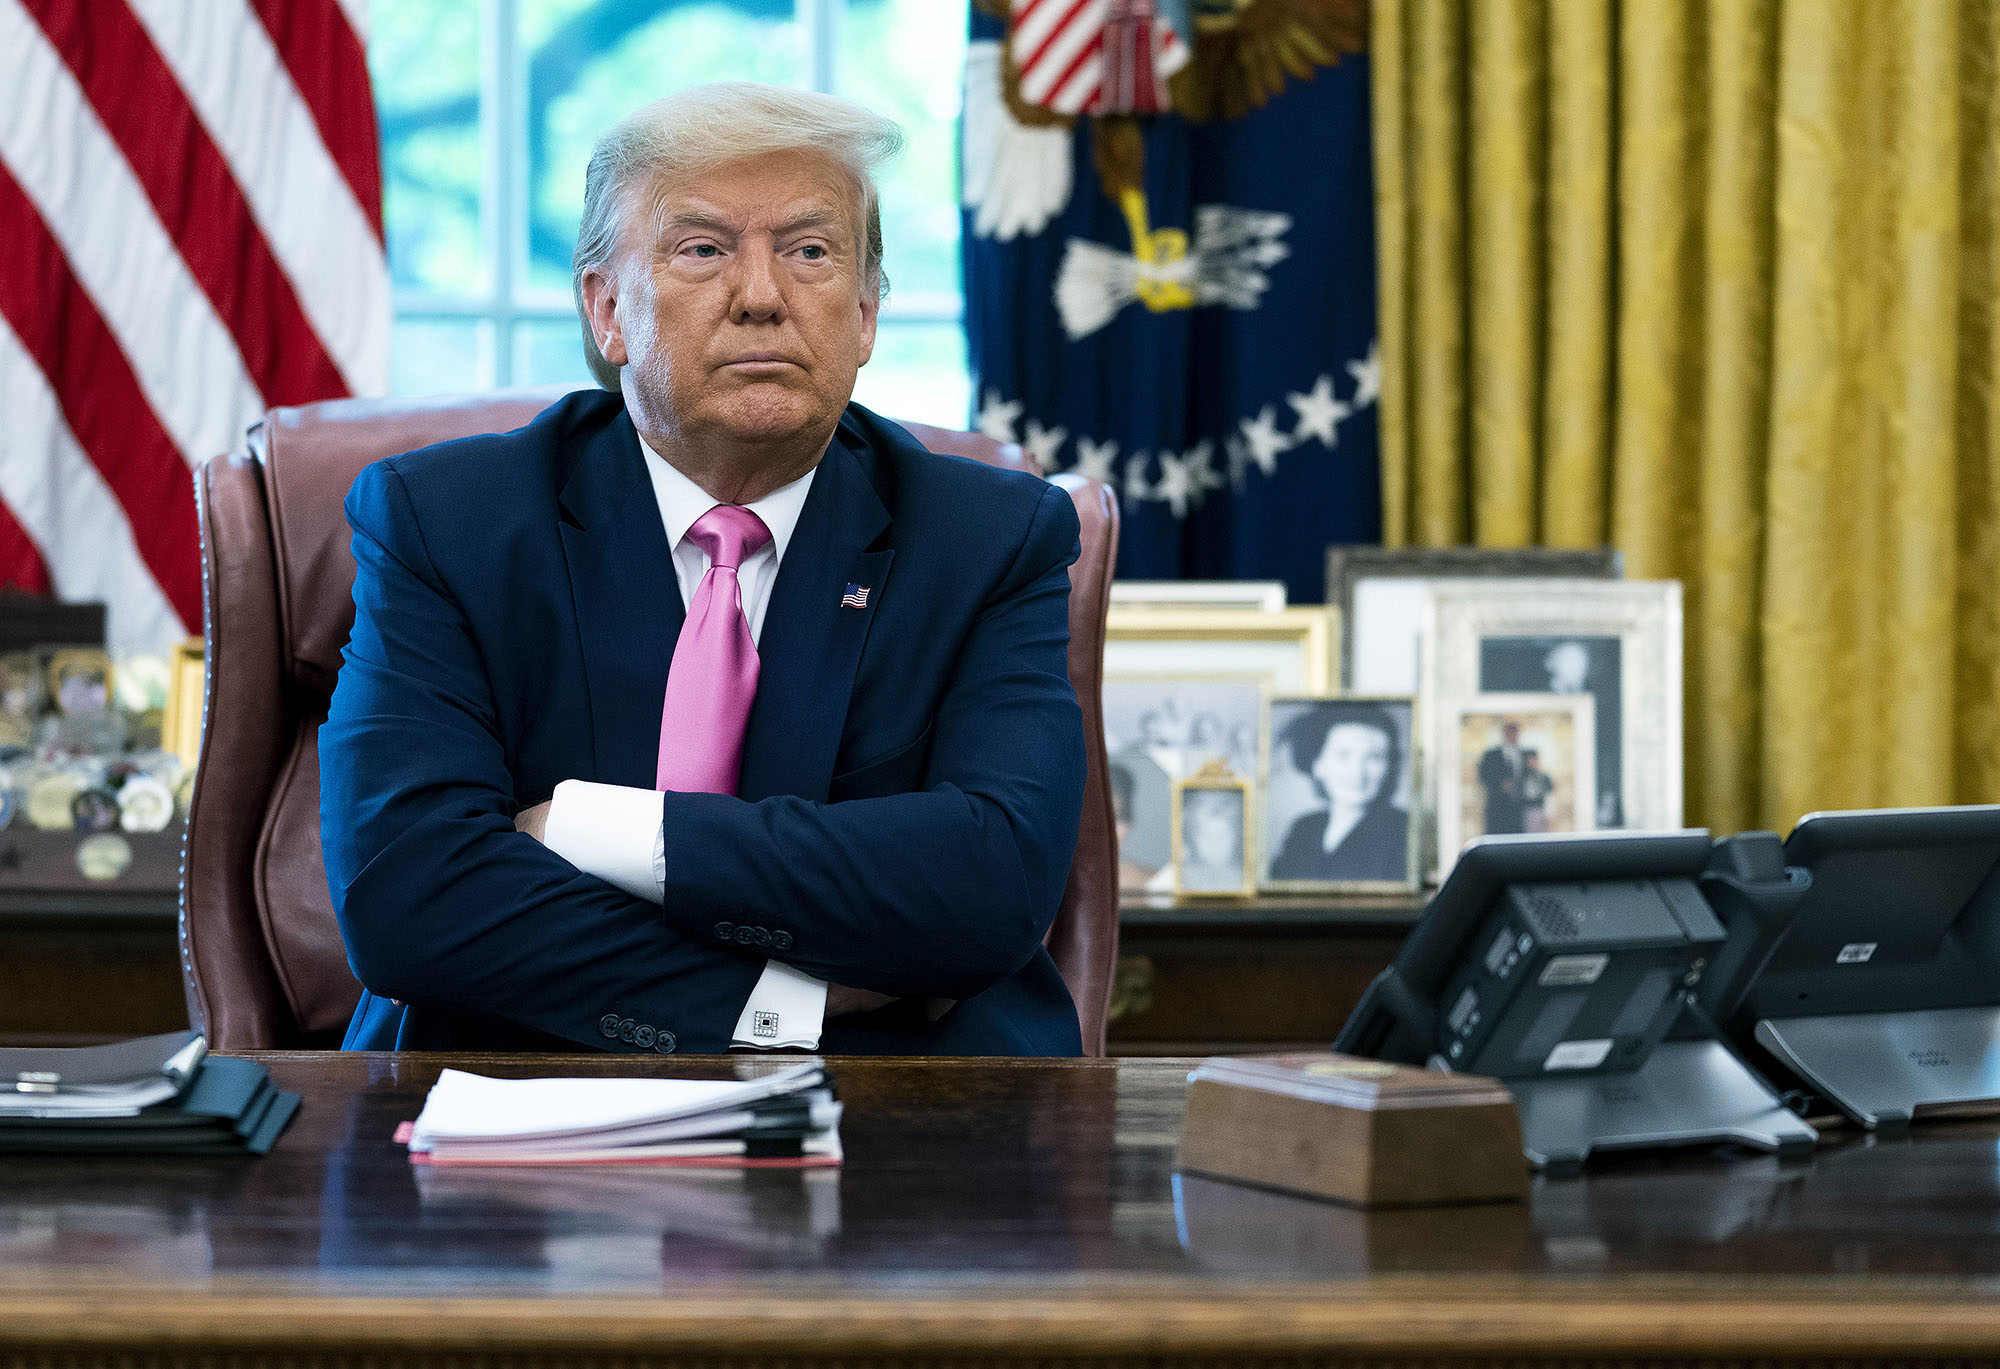 U.S. President Donald Trump talks to reporters at the White House on July 20, in Washington, DC.